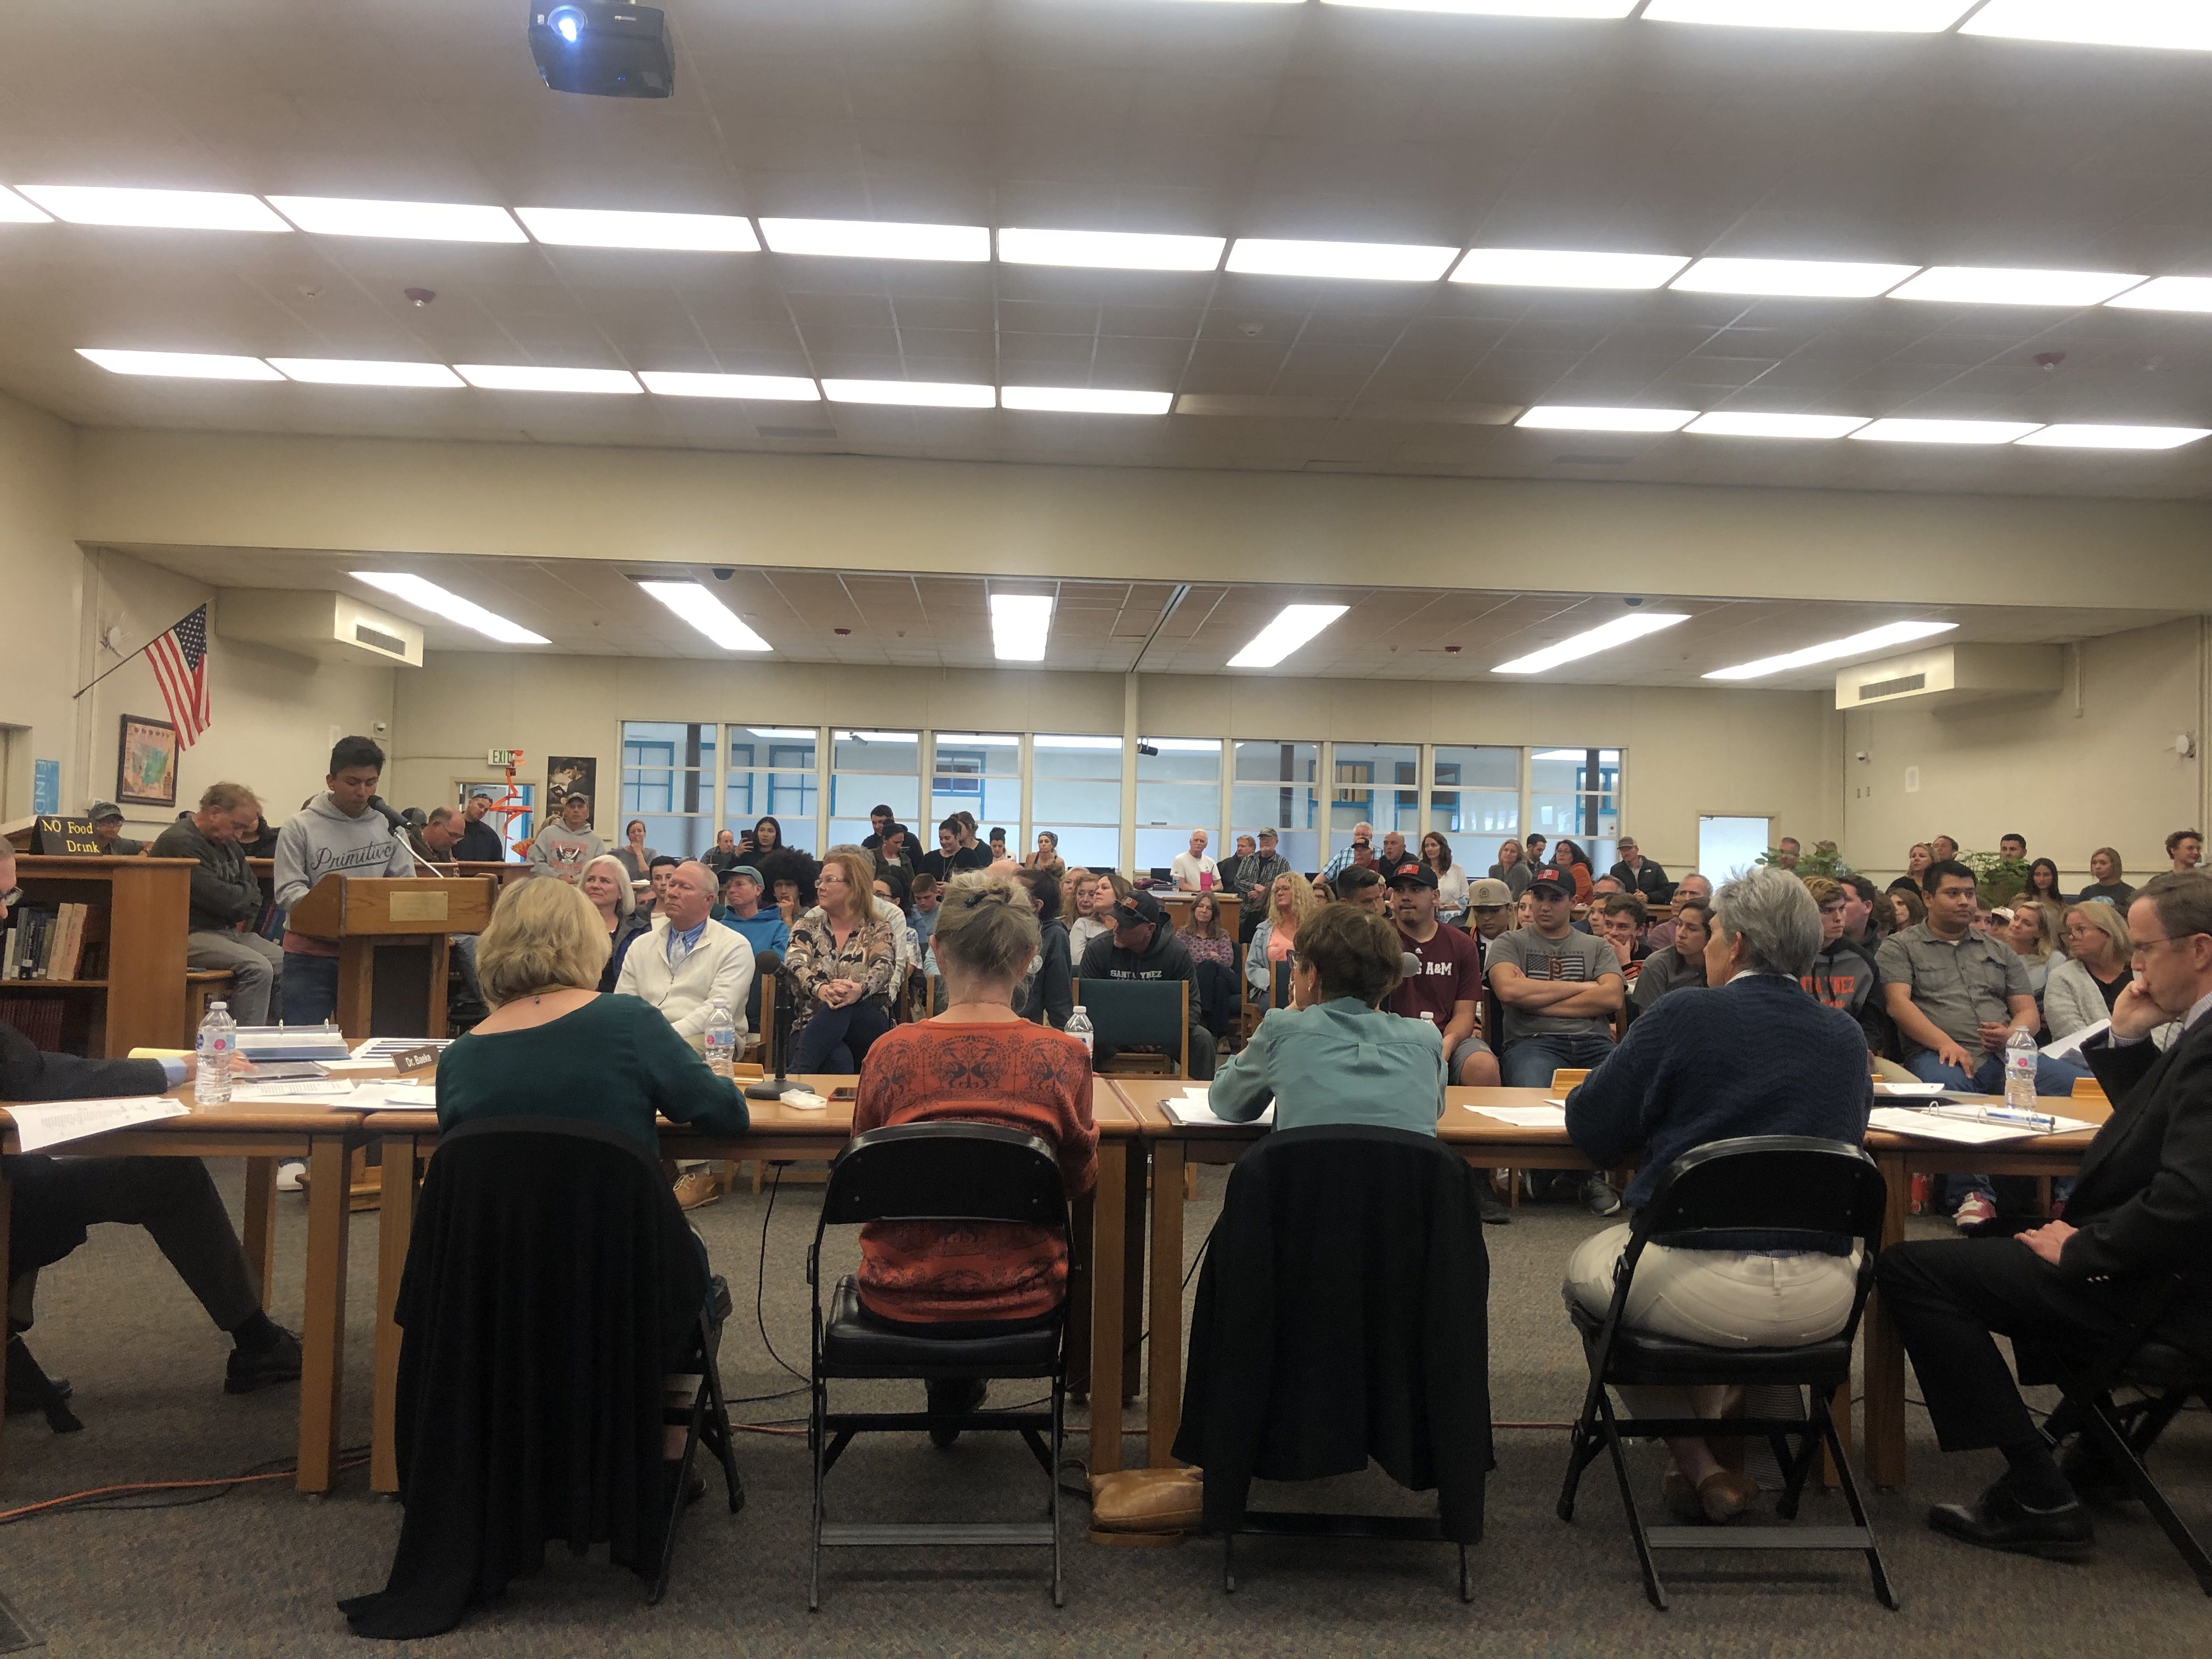 Crowd urges SYHS board not to cut teachers, programs